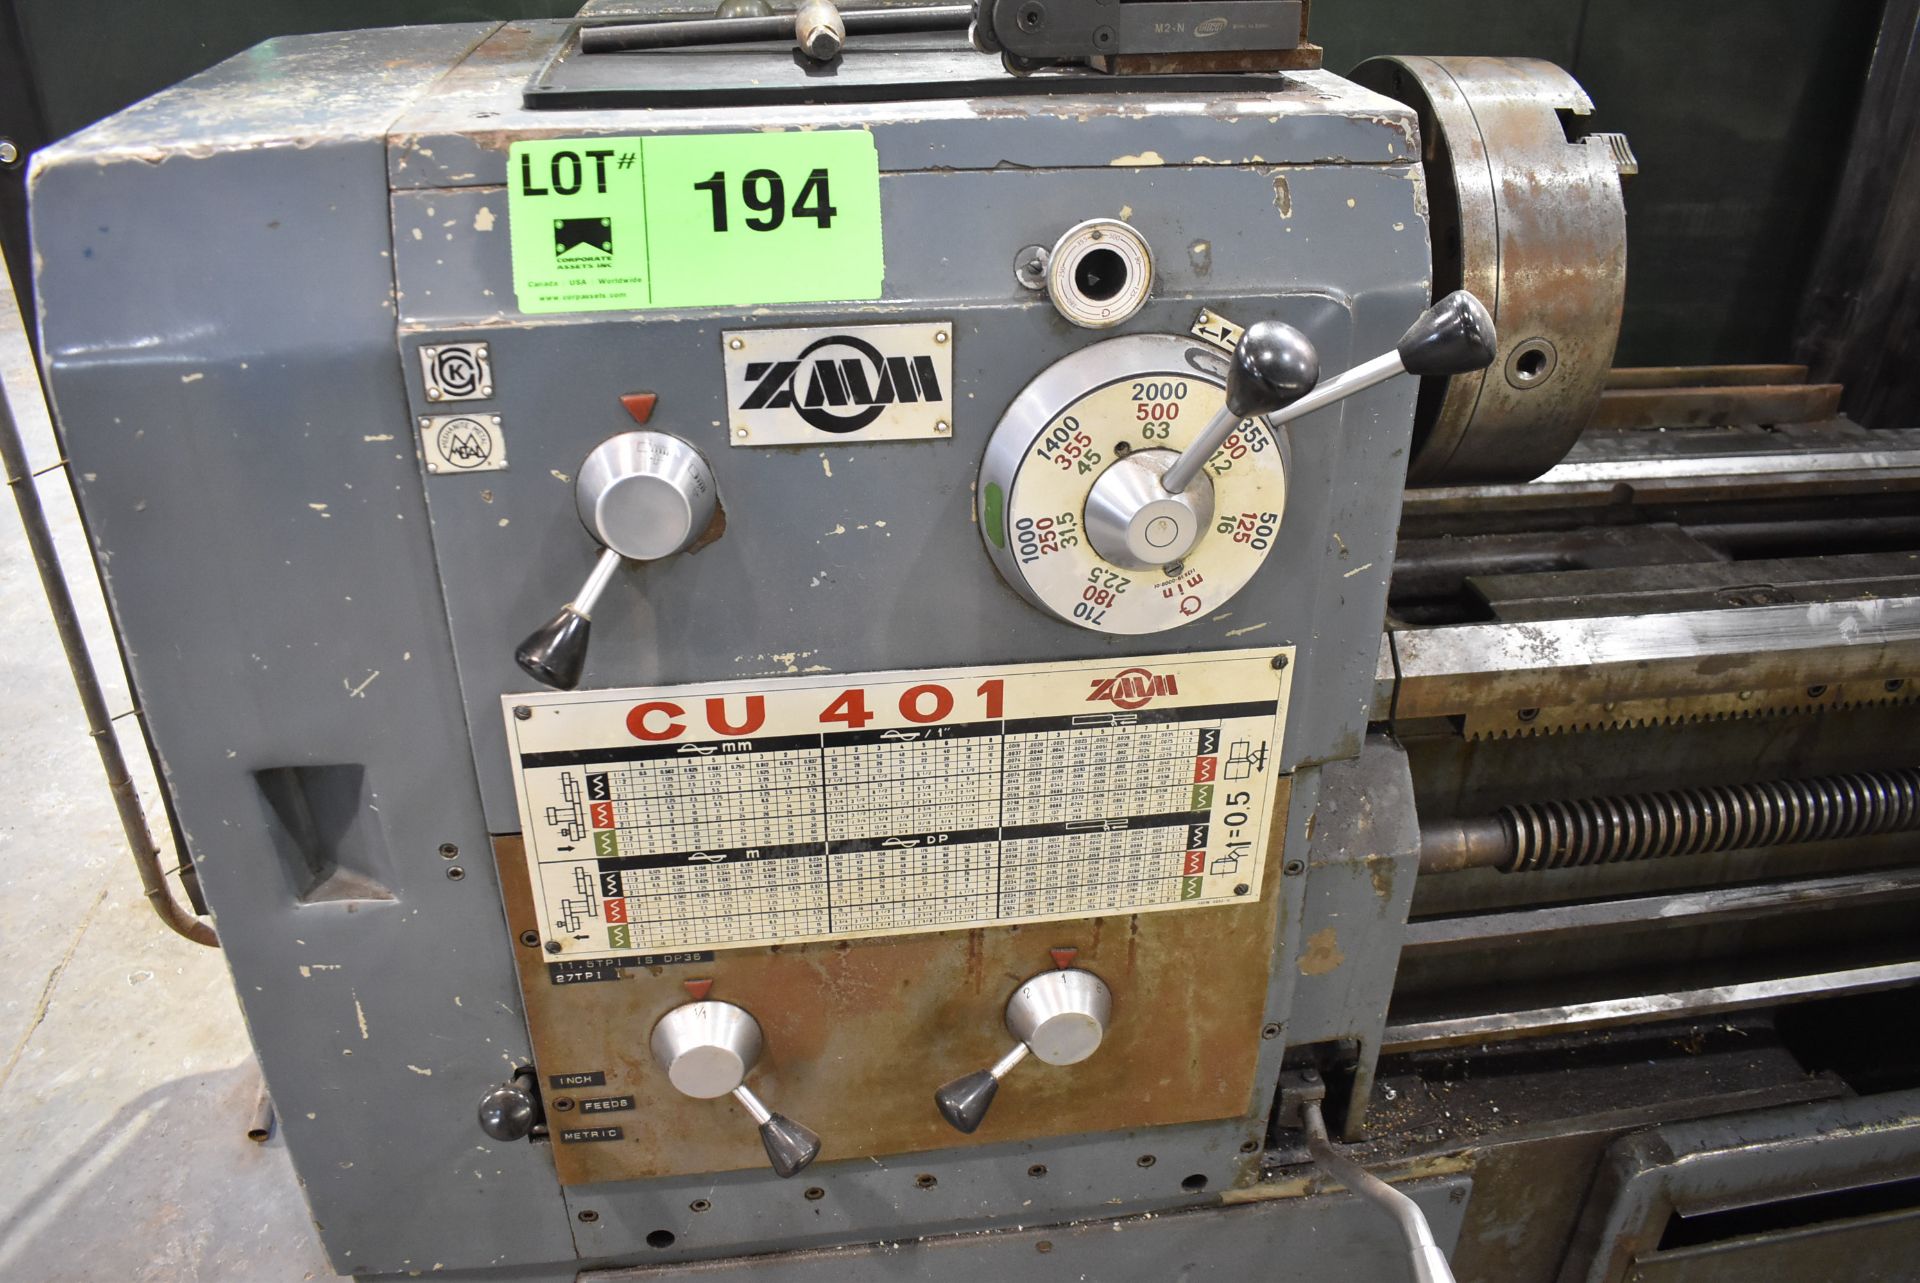 ZMM CU401 GAP BED ENGINE LATHE WITH 12" 3 JAW CHUCK, 64" BETWEEN CENTERS, 21" SWING OVER BED, 3. - Image 4 of 9